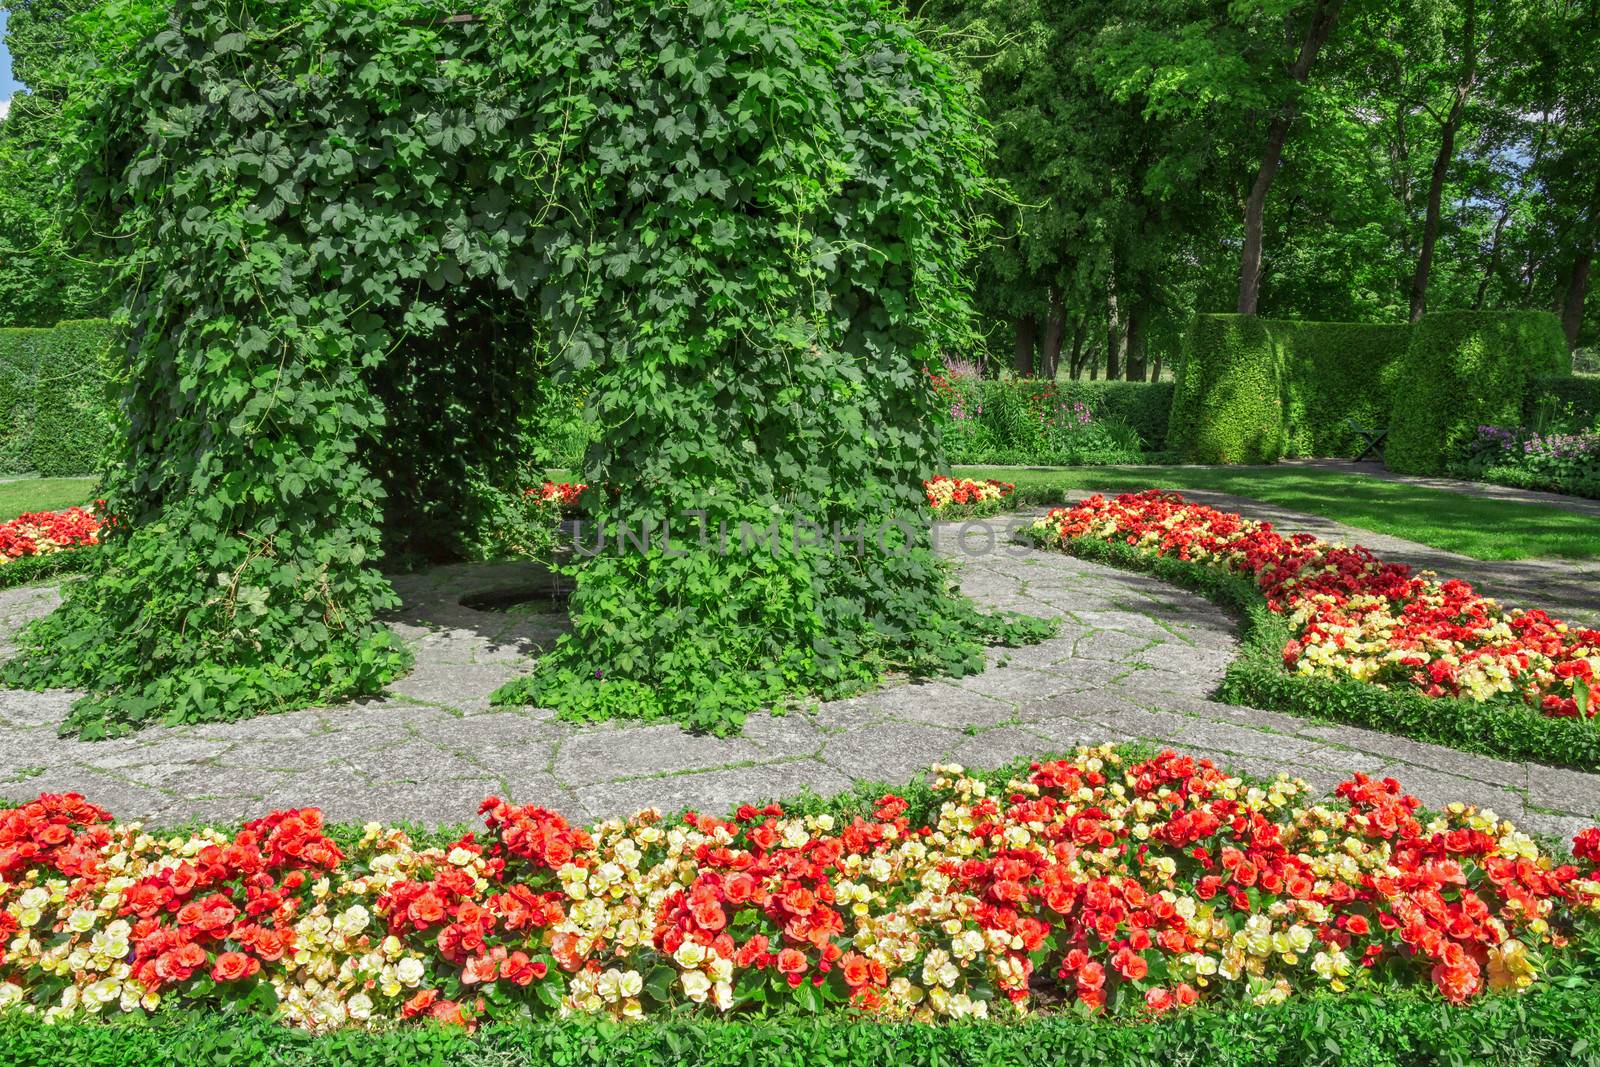 Ornamental garden with blooming red and yellow begonias.